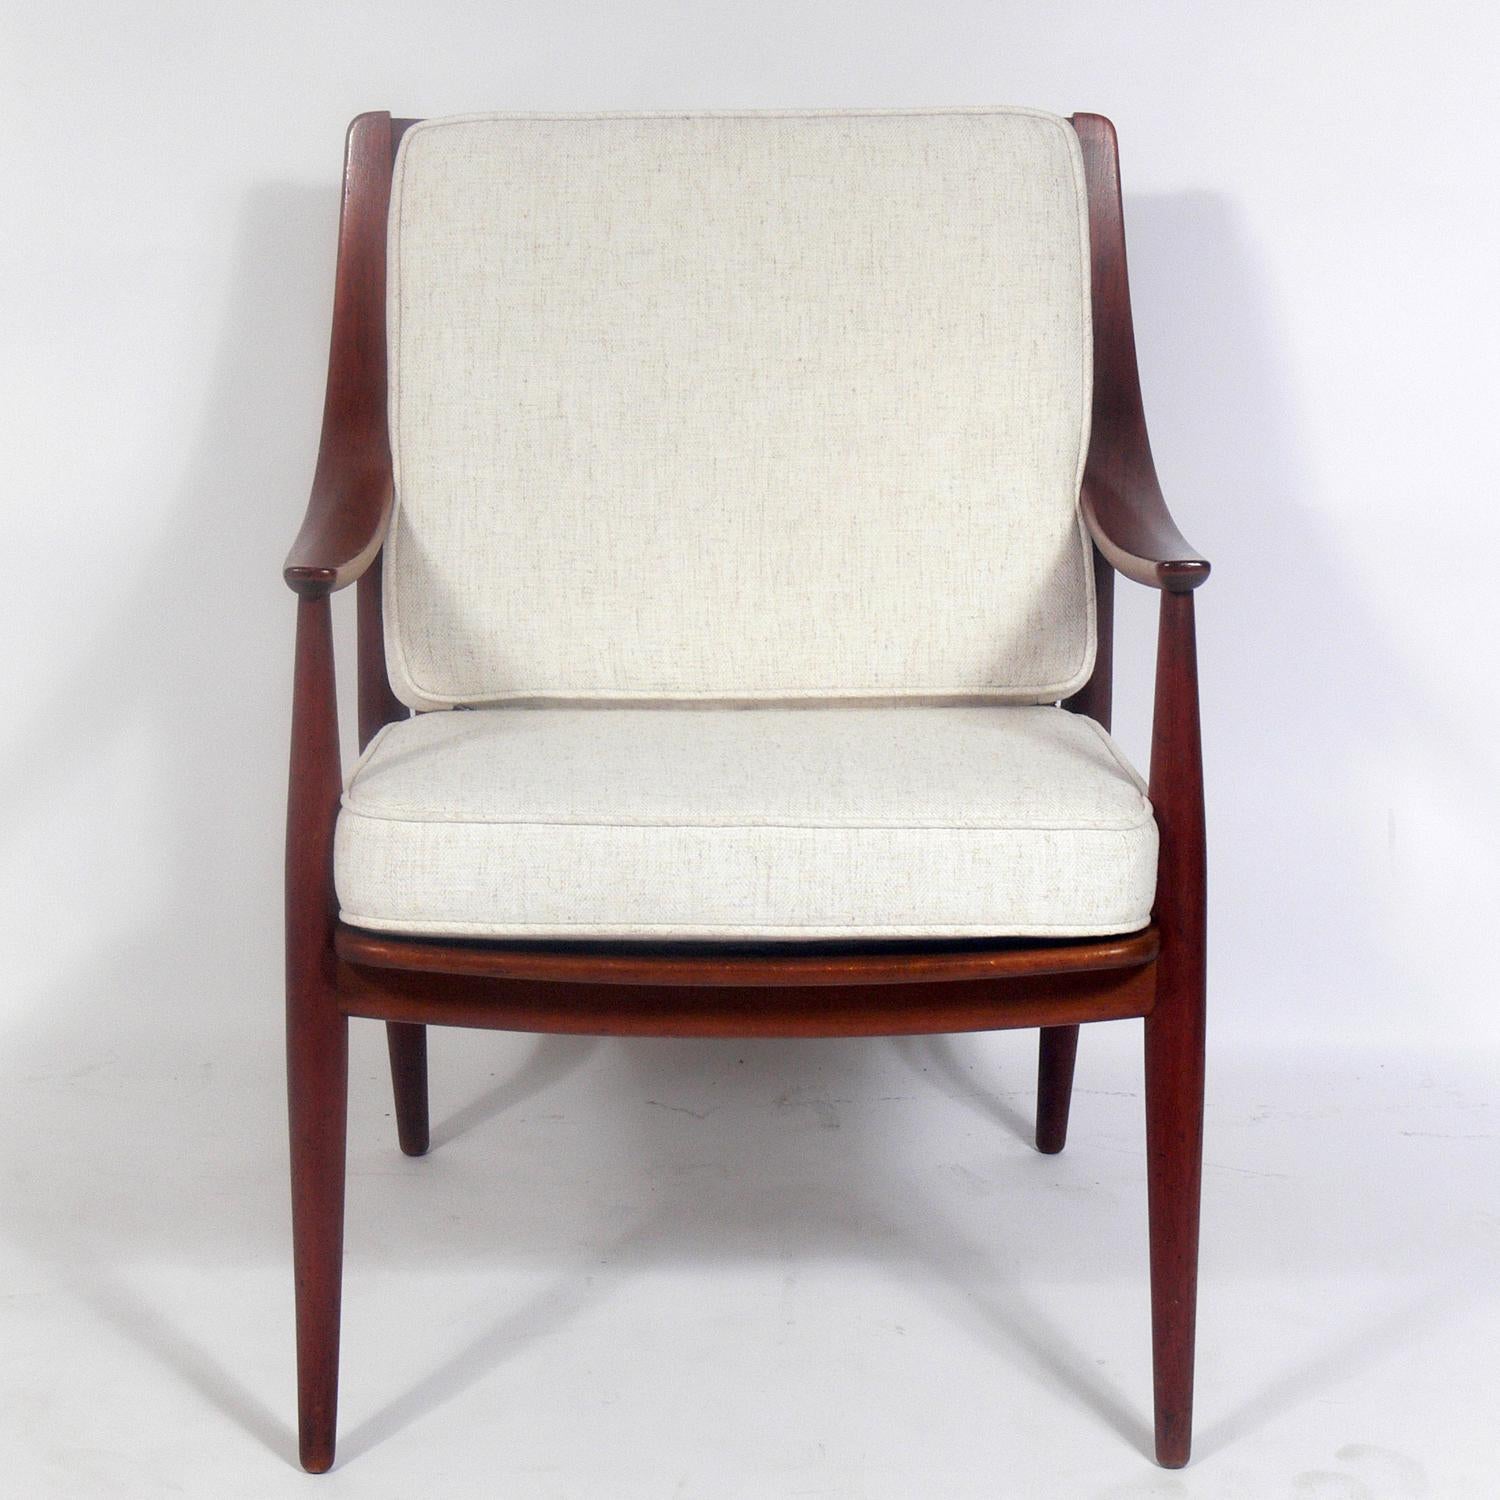 Danish modern lounge chair, designed by Peter Hvidt & Orla Mølgaard Nielsen for France & Daverkosen and retailed by John Stuart of NYC, circa 1960s. It has been reupholstered in an ivory color herringbone fabric. It retains it's original finish and